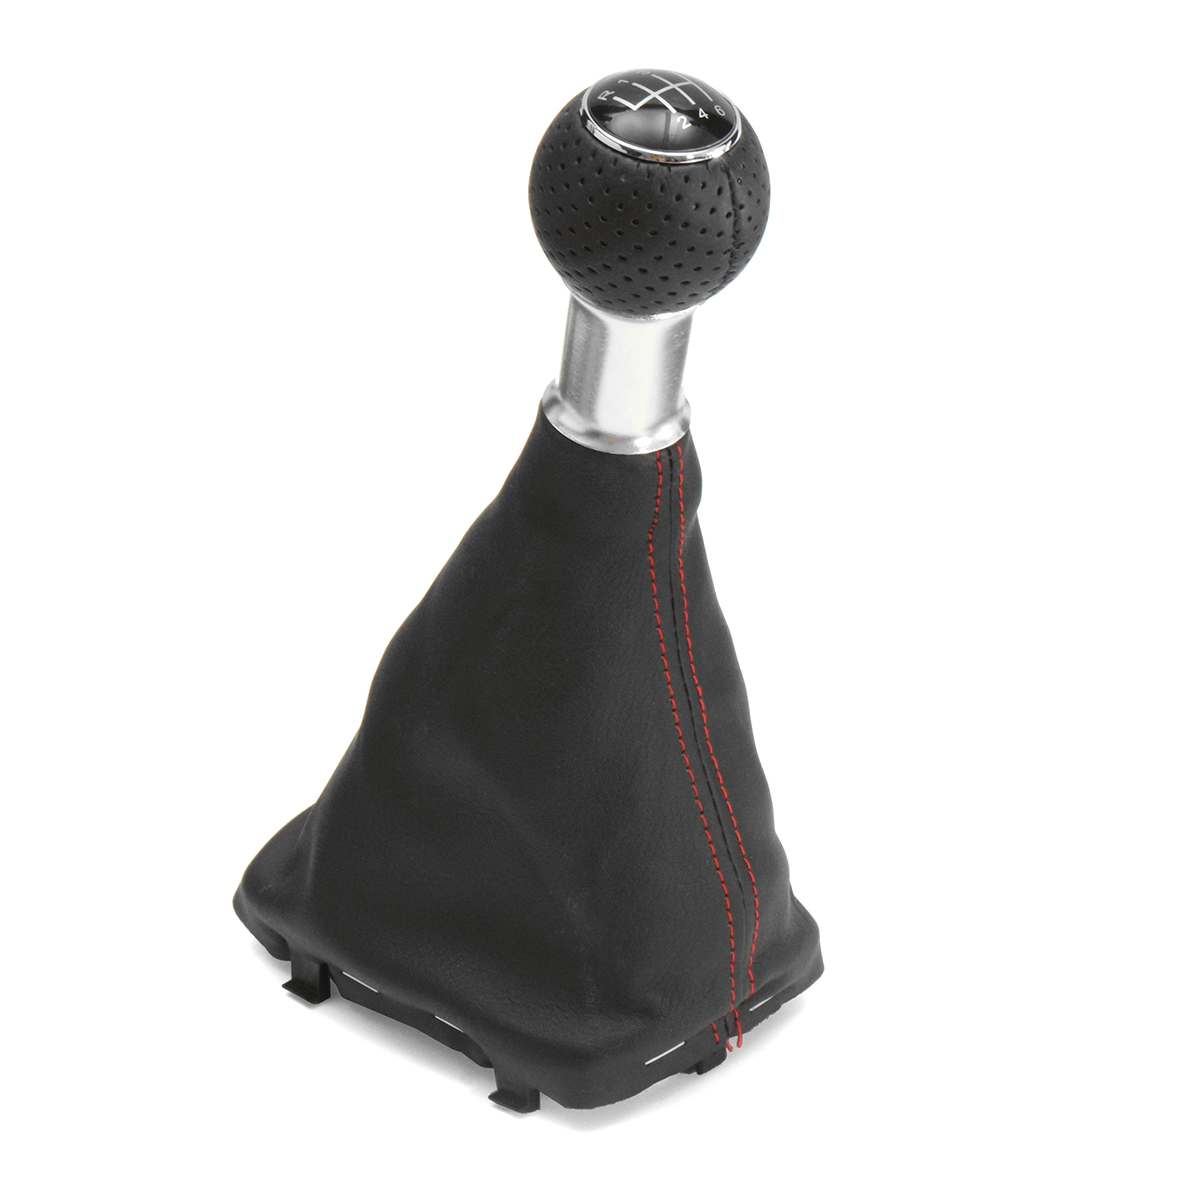 6 Speed Shifter Gear Shift Knob Gaitor Boot Red Line For Audi A3 S3 2001-2003 1